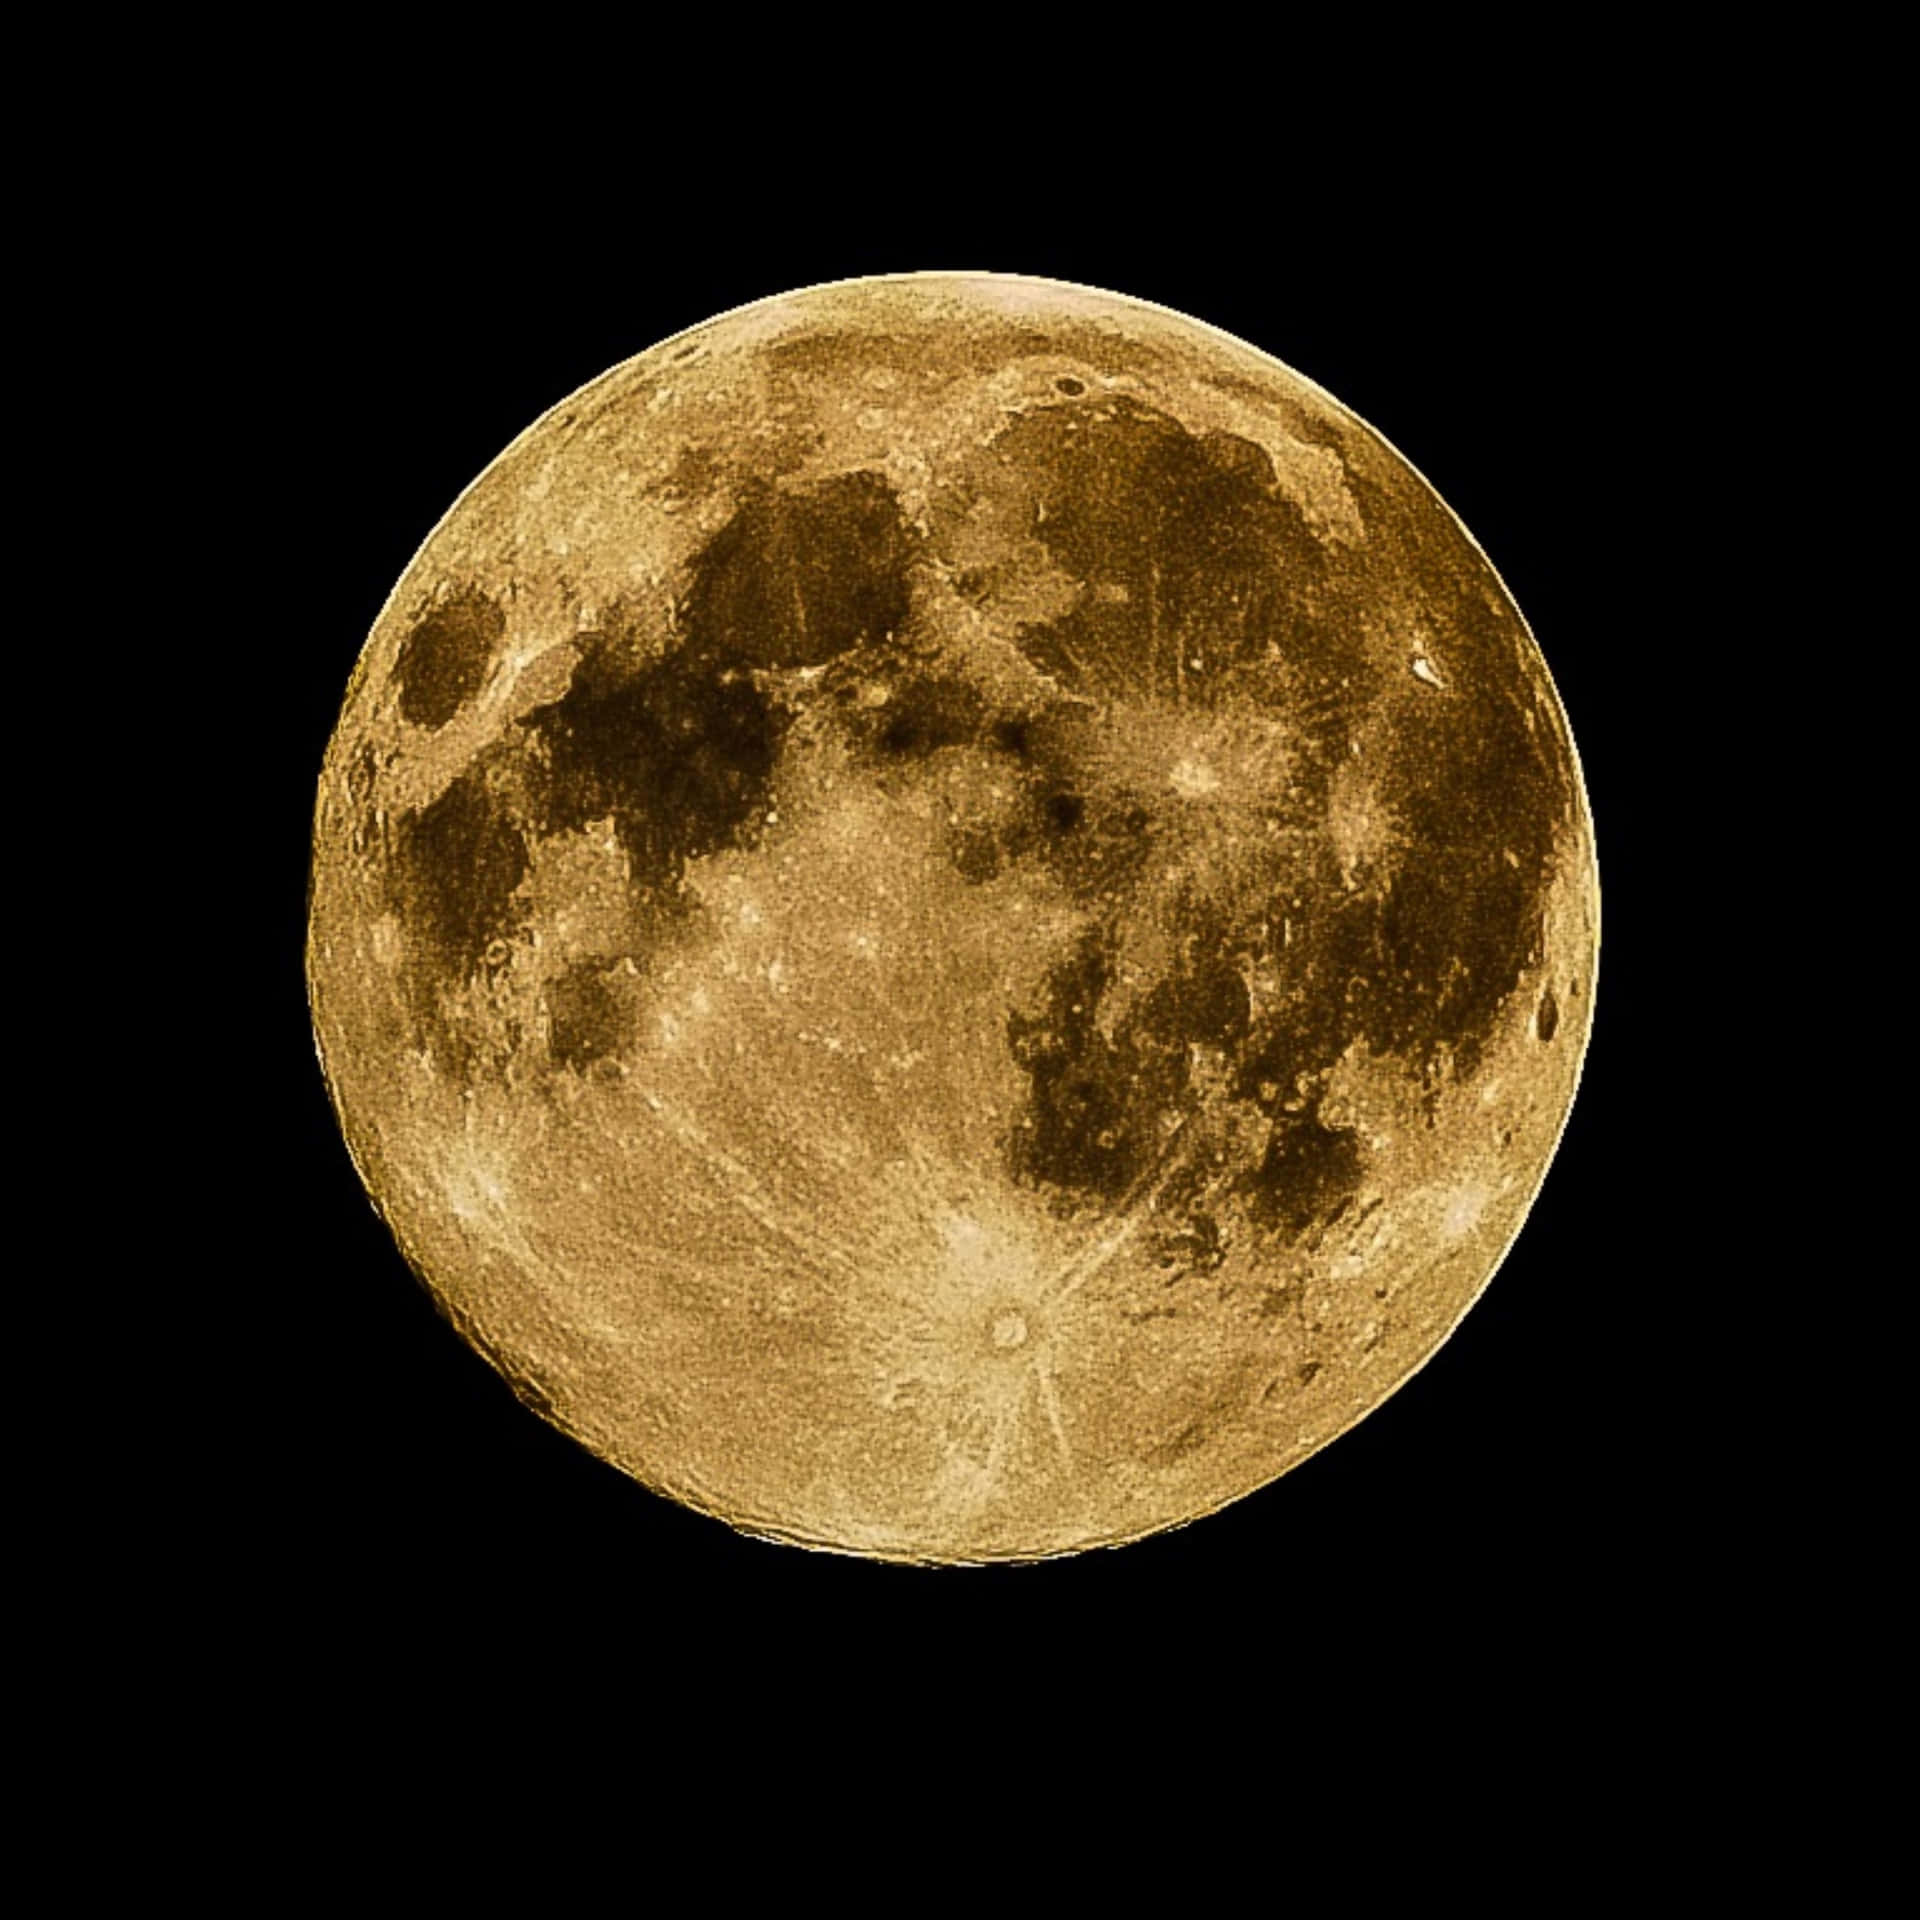 a full moon is shown against a black background